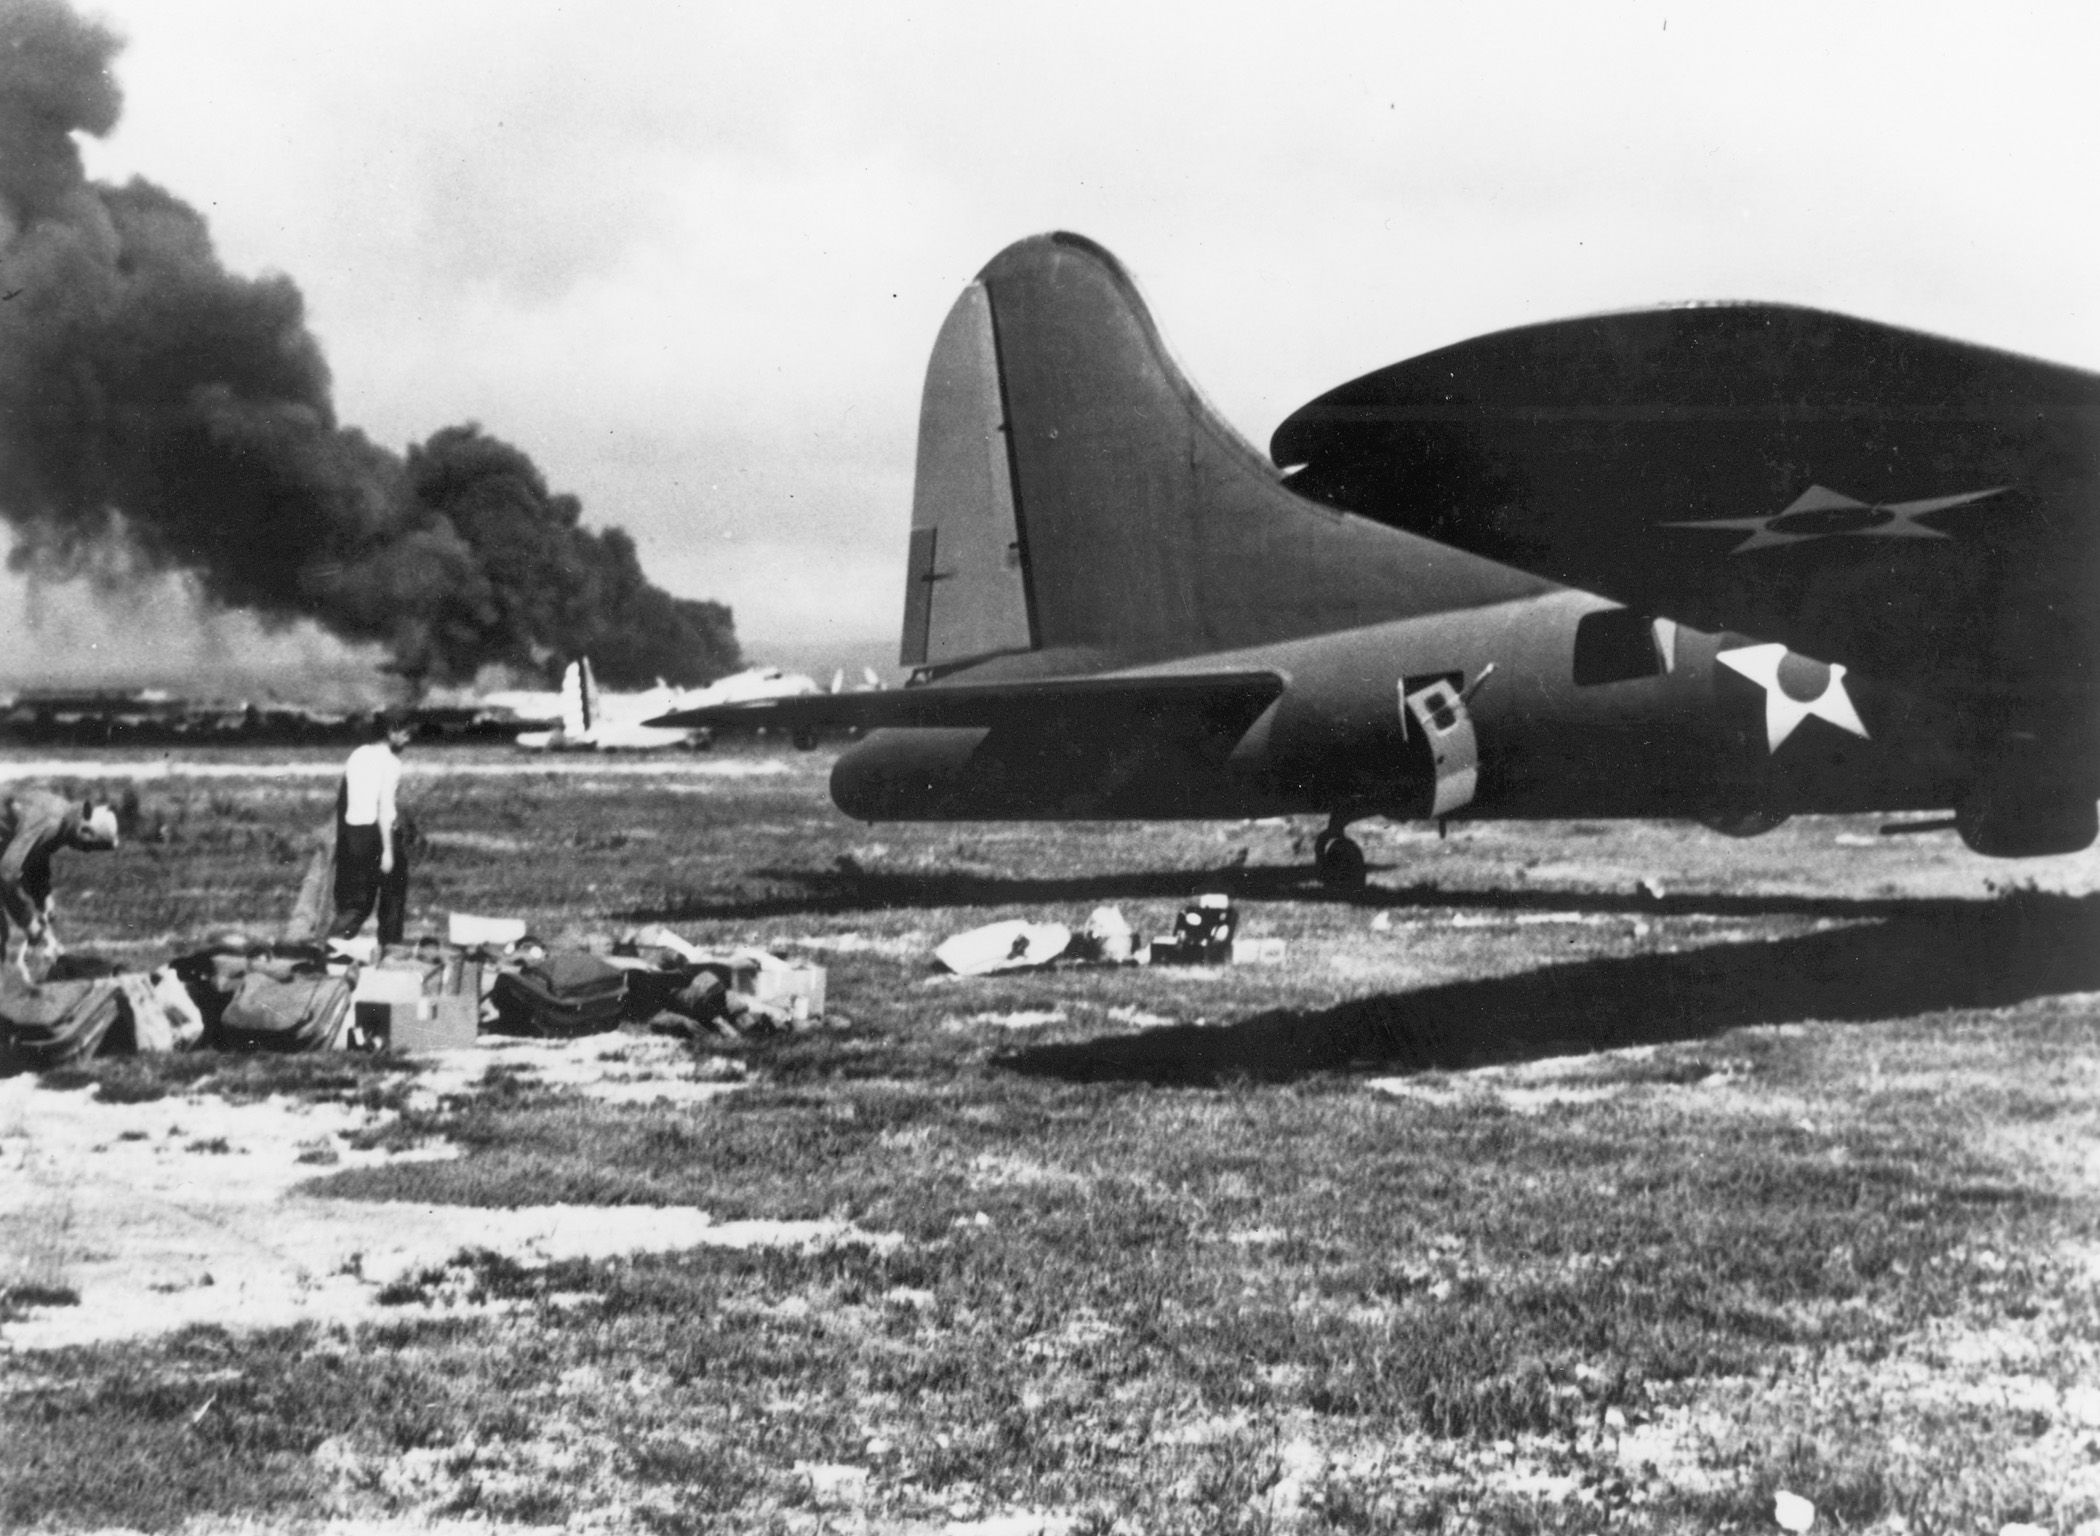 This Boeing B-17E Flying Fortress of the 7th Bombardment Group (right foreground) has just arrived to join the B-17C Flying Fortress in the background where flames burn at Hickam Army Airfield, Hawaii, during the Japanese attack.